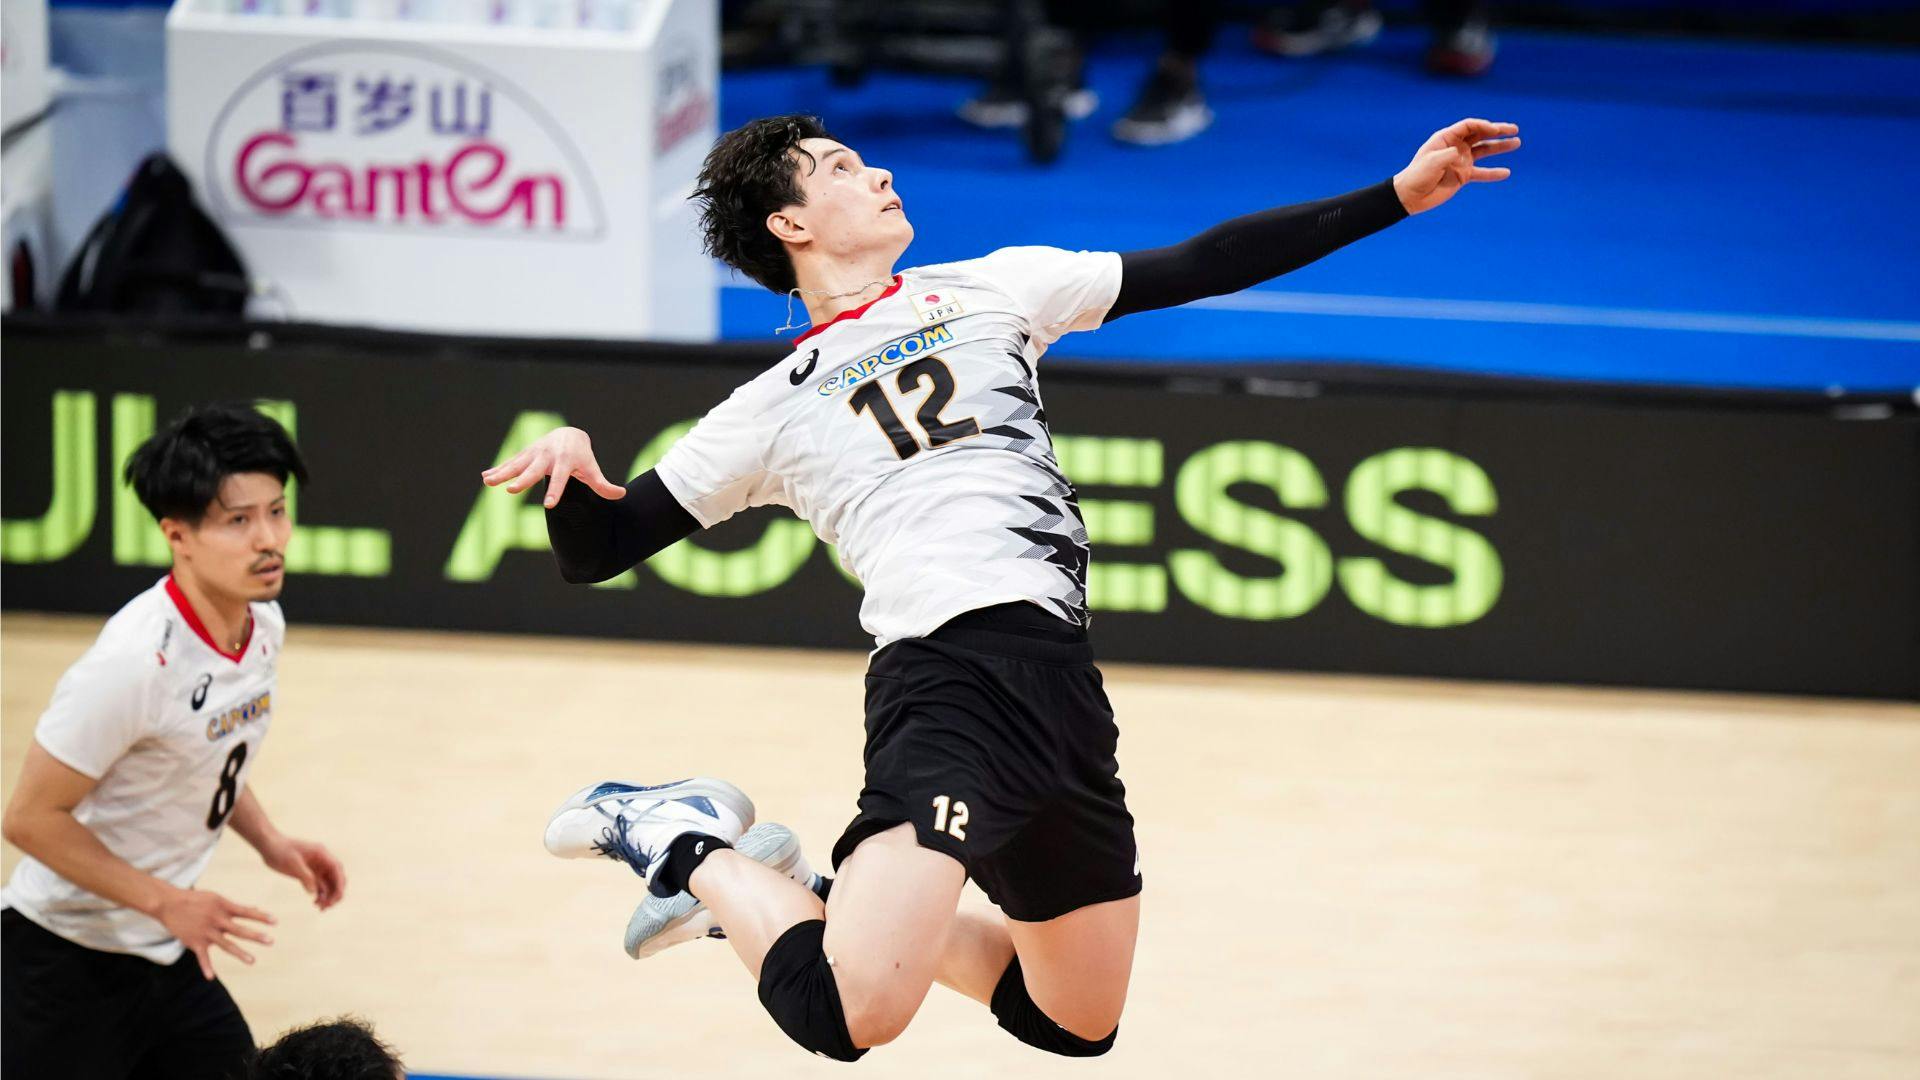 VNL: Ran Takahashi points out necessary improvement for Japan after tough five-set loss to Canada